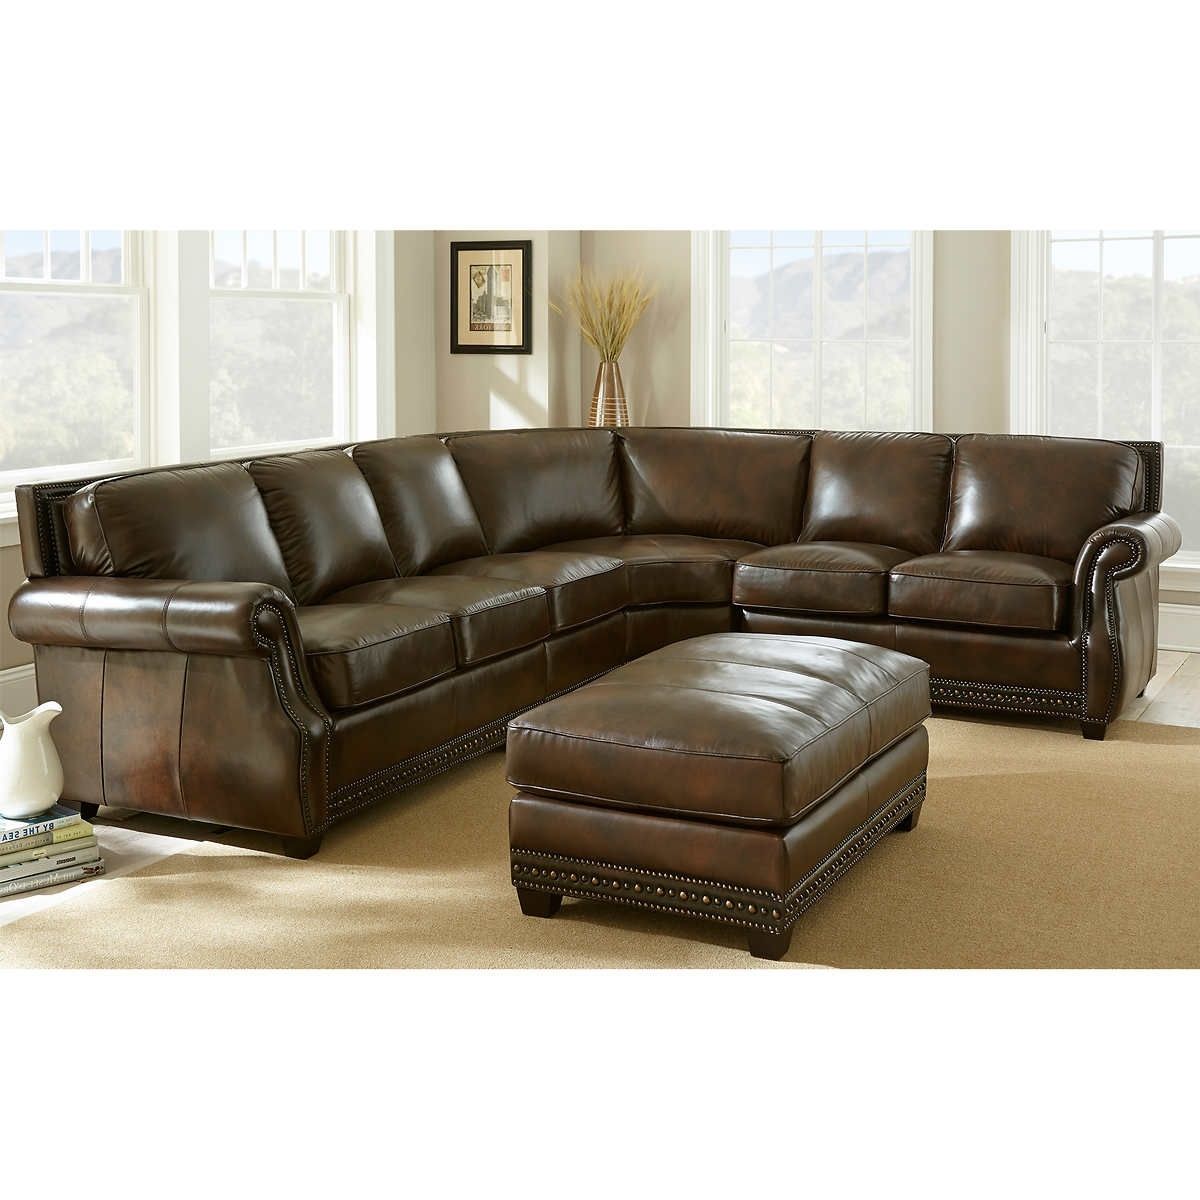 High End Leather Sectional Sofas Within Fashionable Sectional Leather Couches Natuzzi Leather Sectional Leather (View 5 of 15)